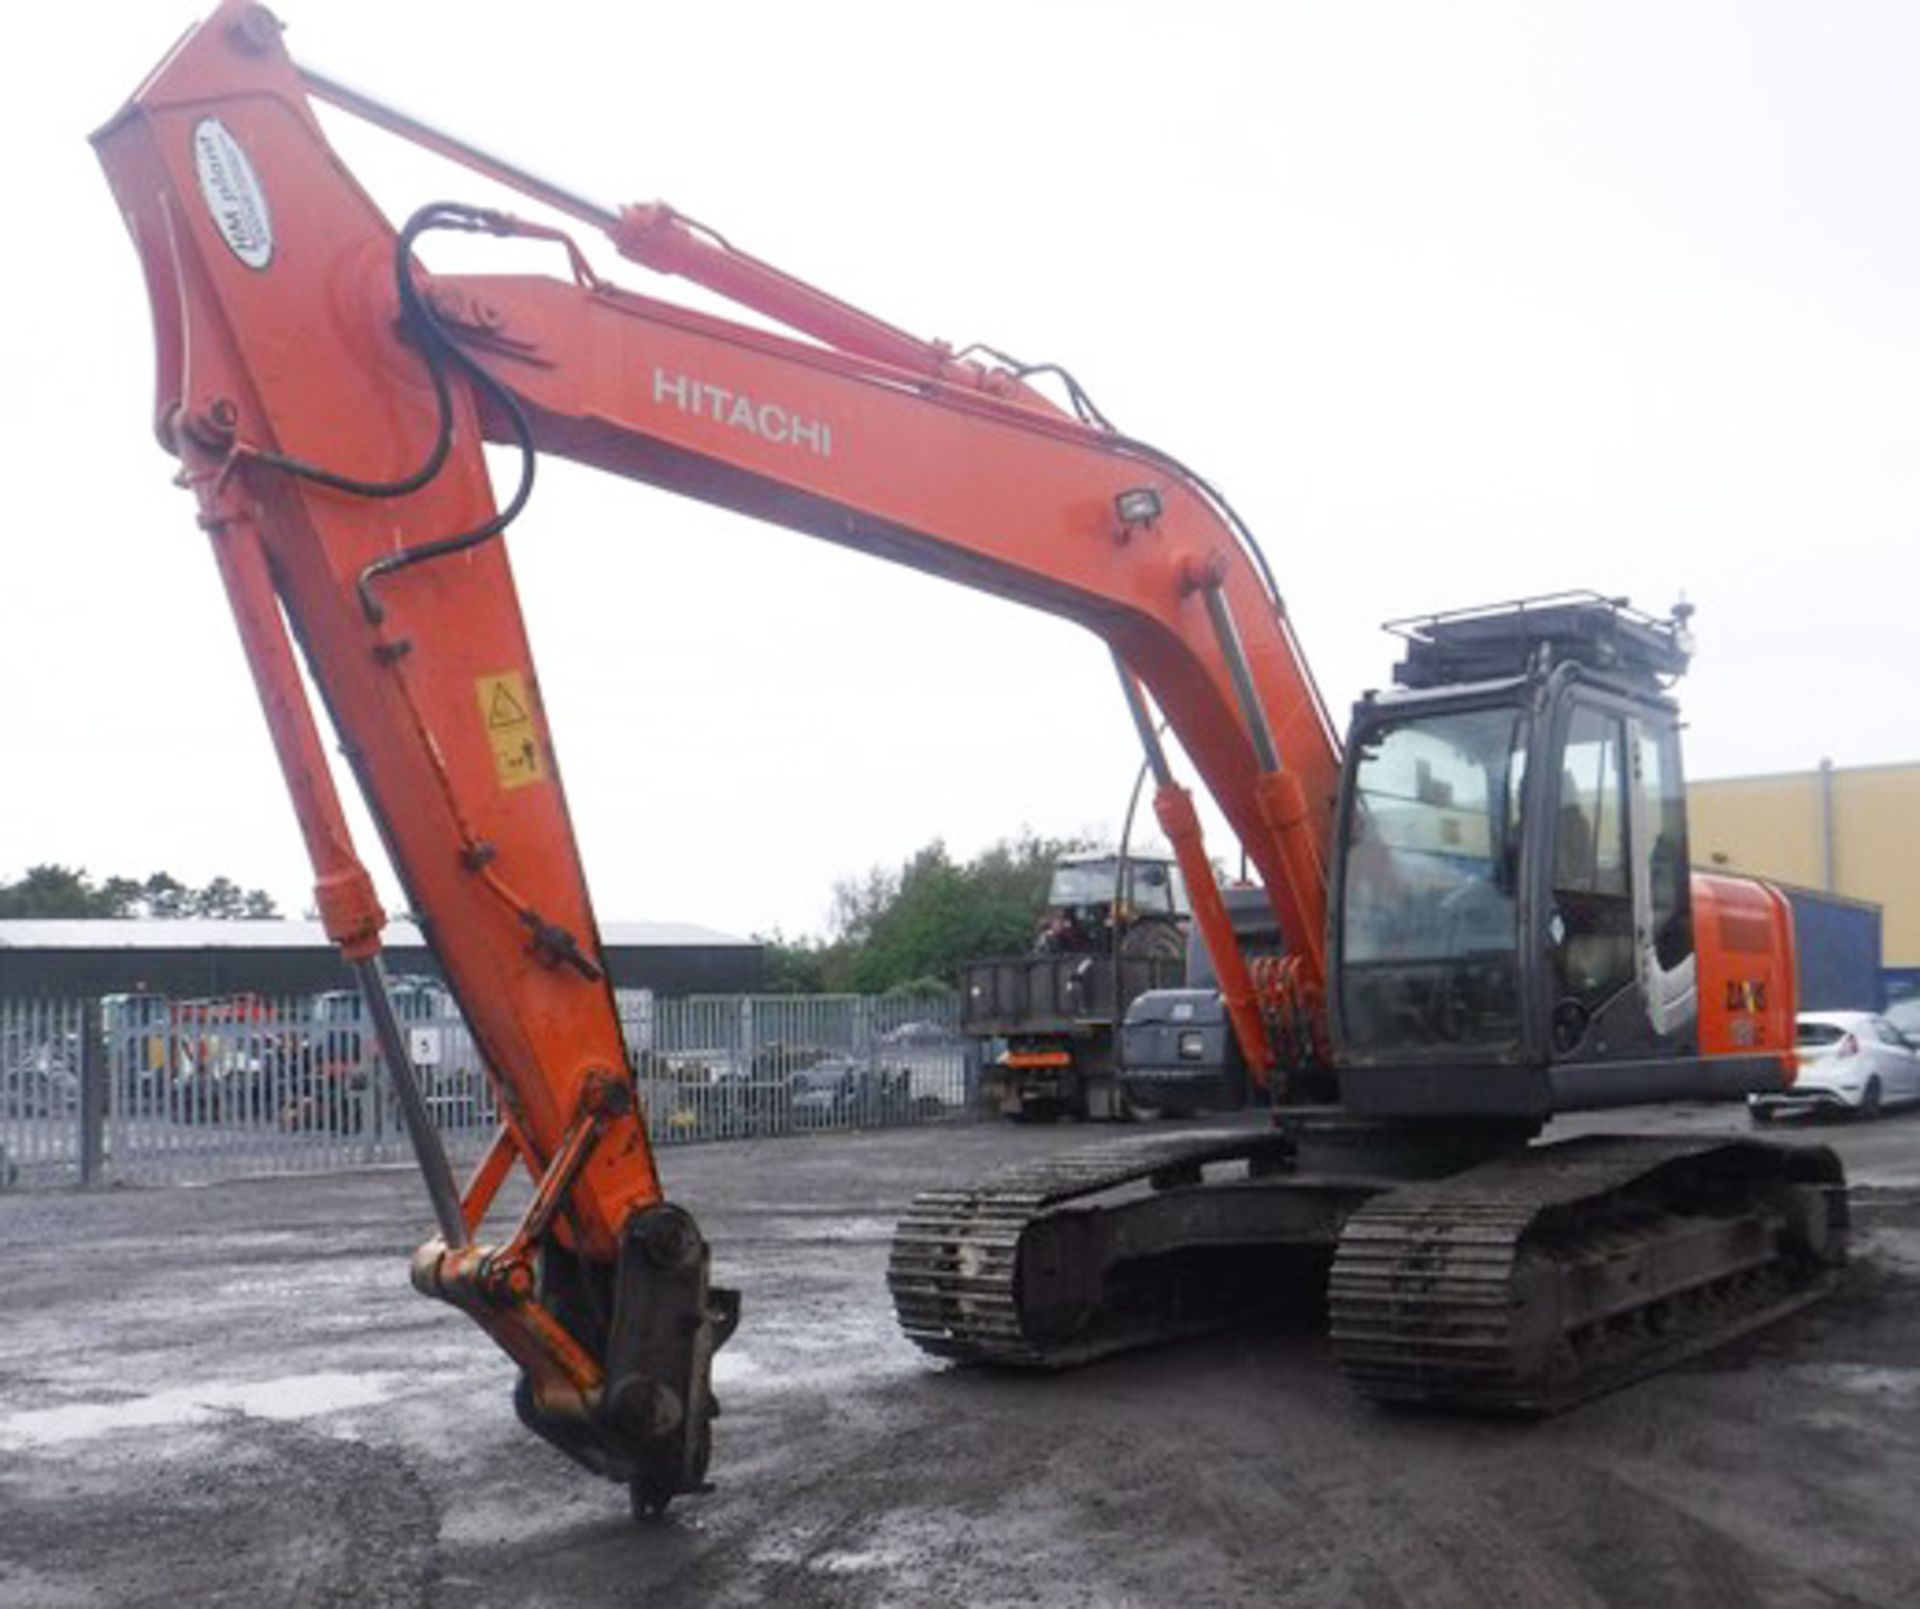 2008 HITACHI ZX180LC-3 tracked excavator. VIN - HCMBCF00E00020105. 8140hrs (not verified). No bucket